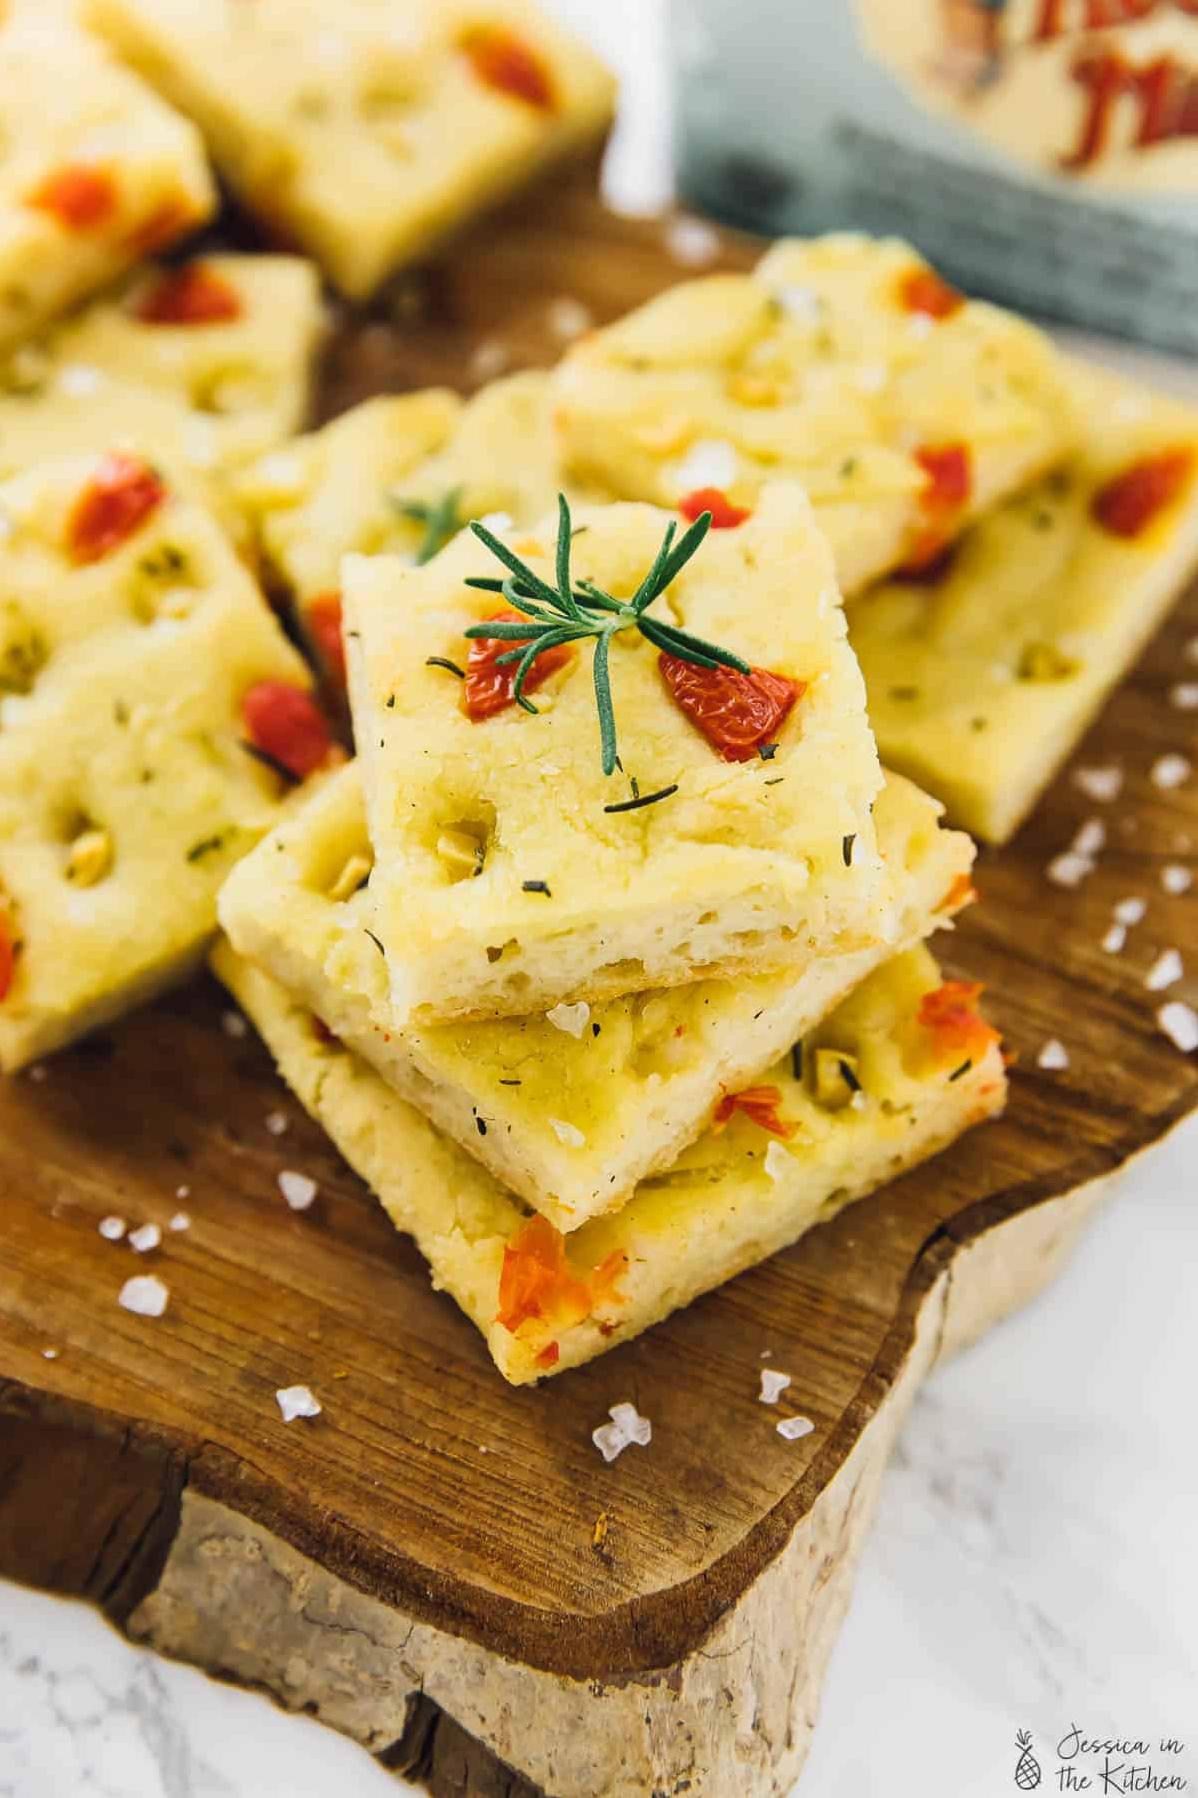  Life is better with fresh baked focaccia, especially when it's gluten-free.